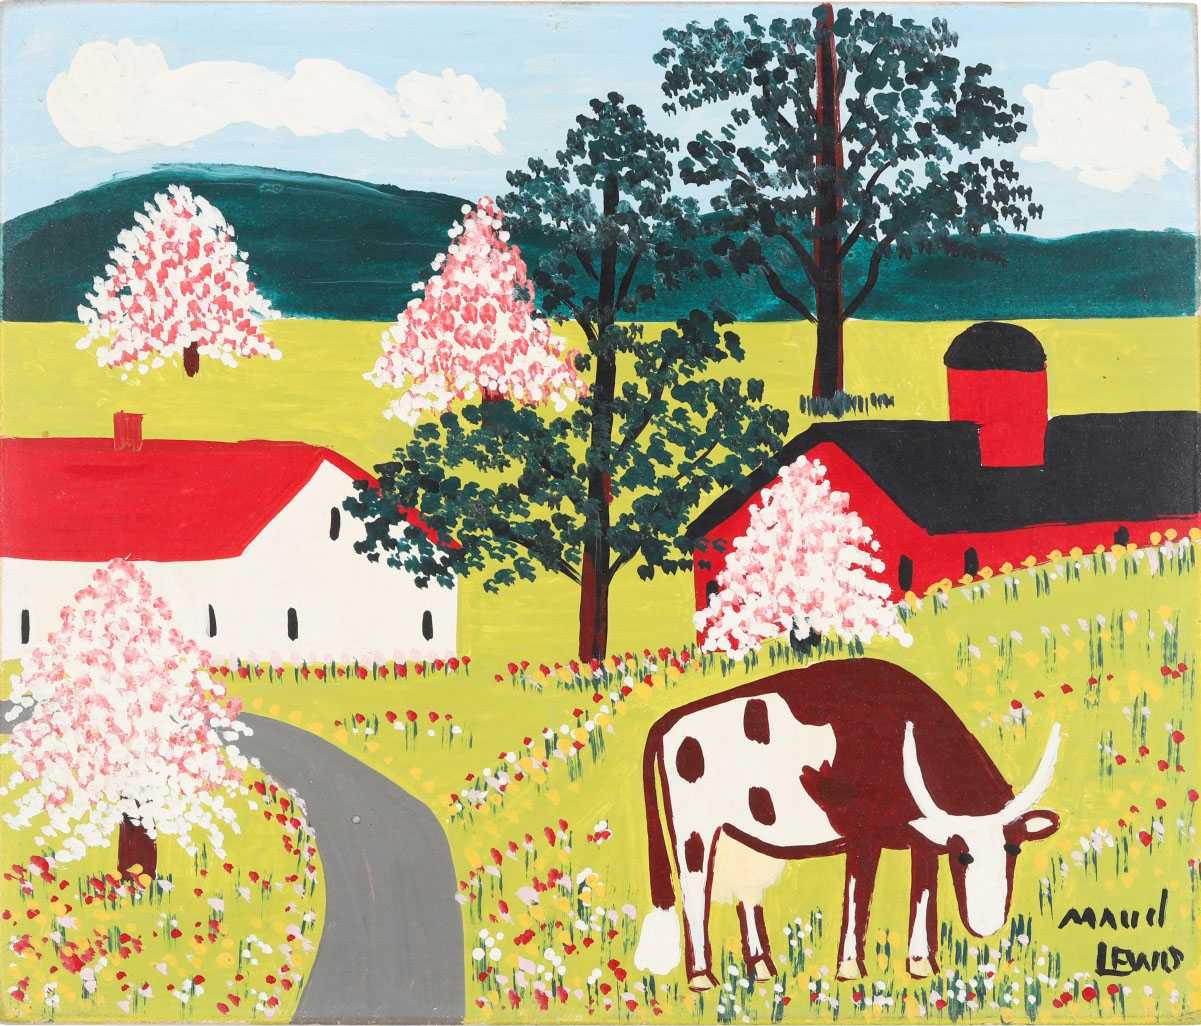 Three Maud Lewis works and the Greg Hisey Canadiana collection featured at Miller &#038; Miller April 13